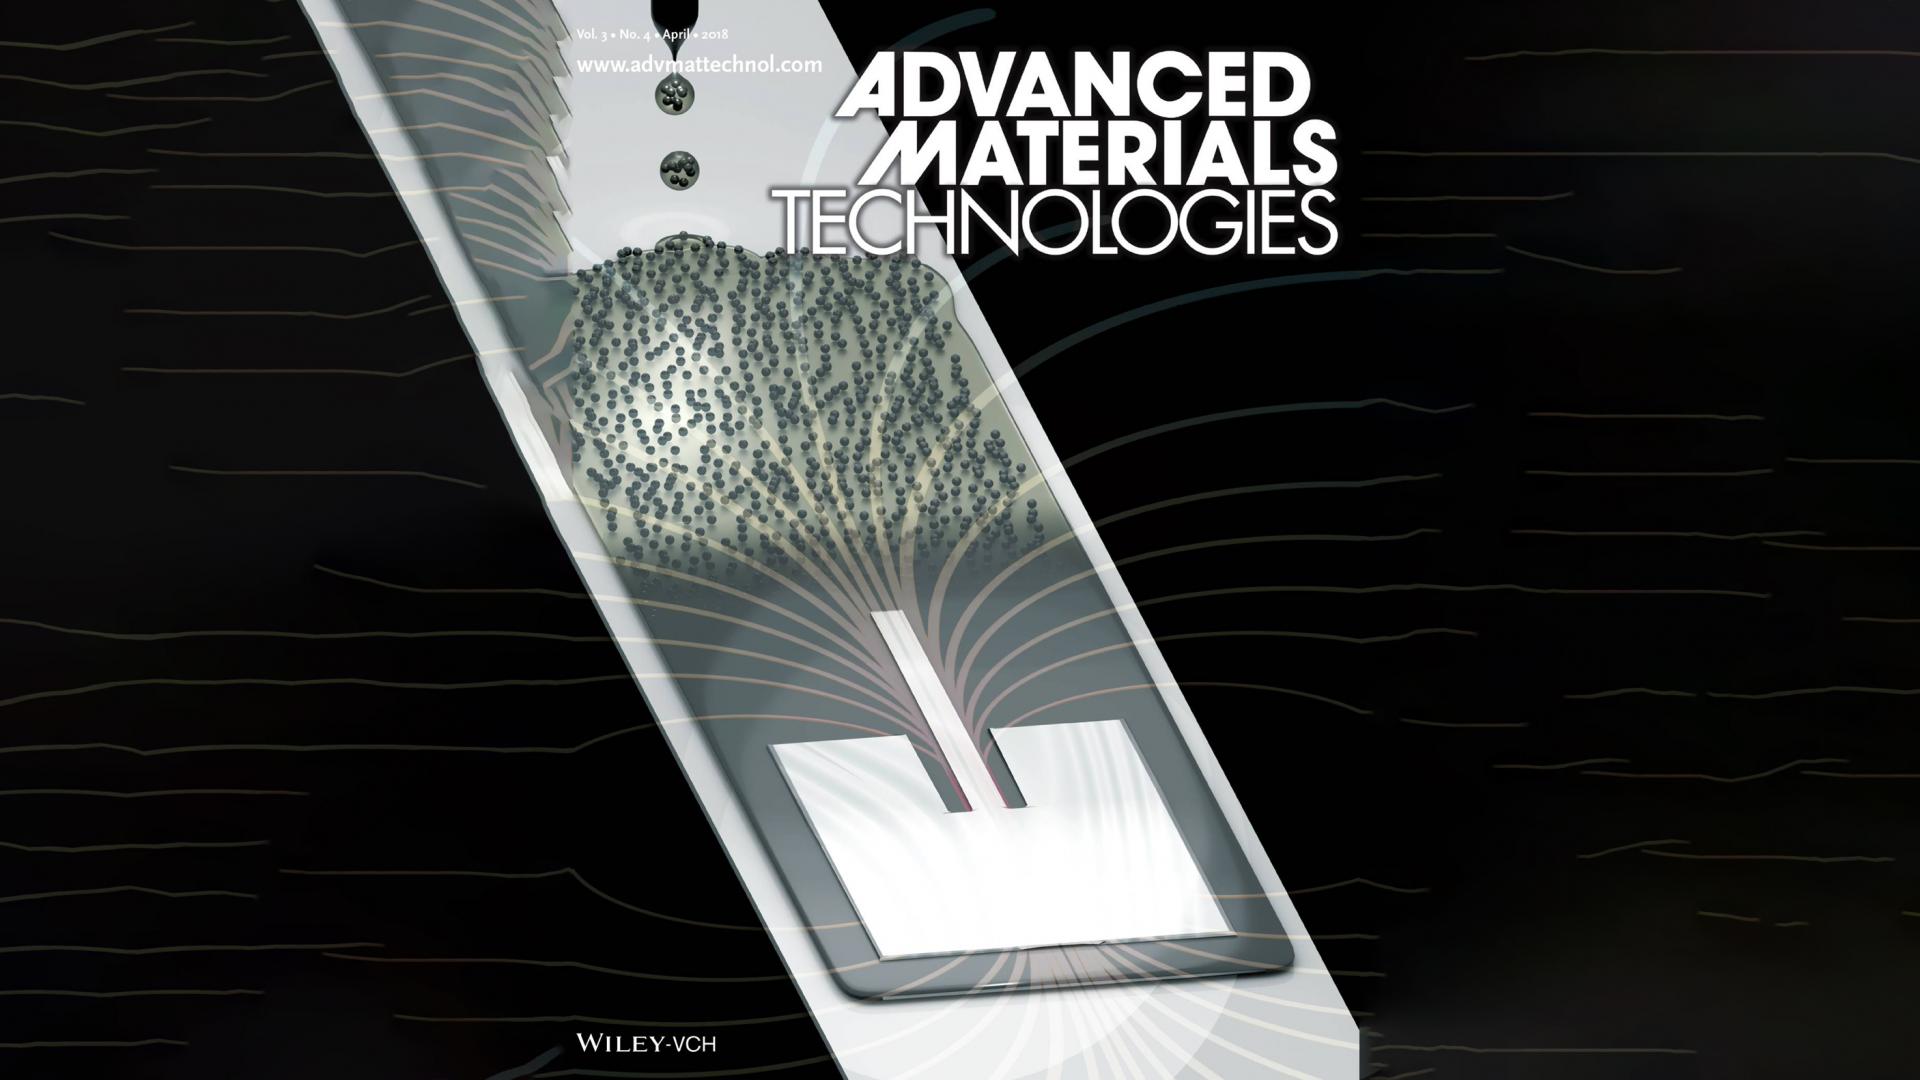 Cover Picture for "Advanced Materials Technologies" Impacts